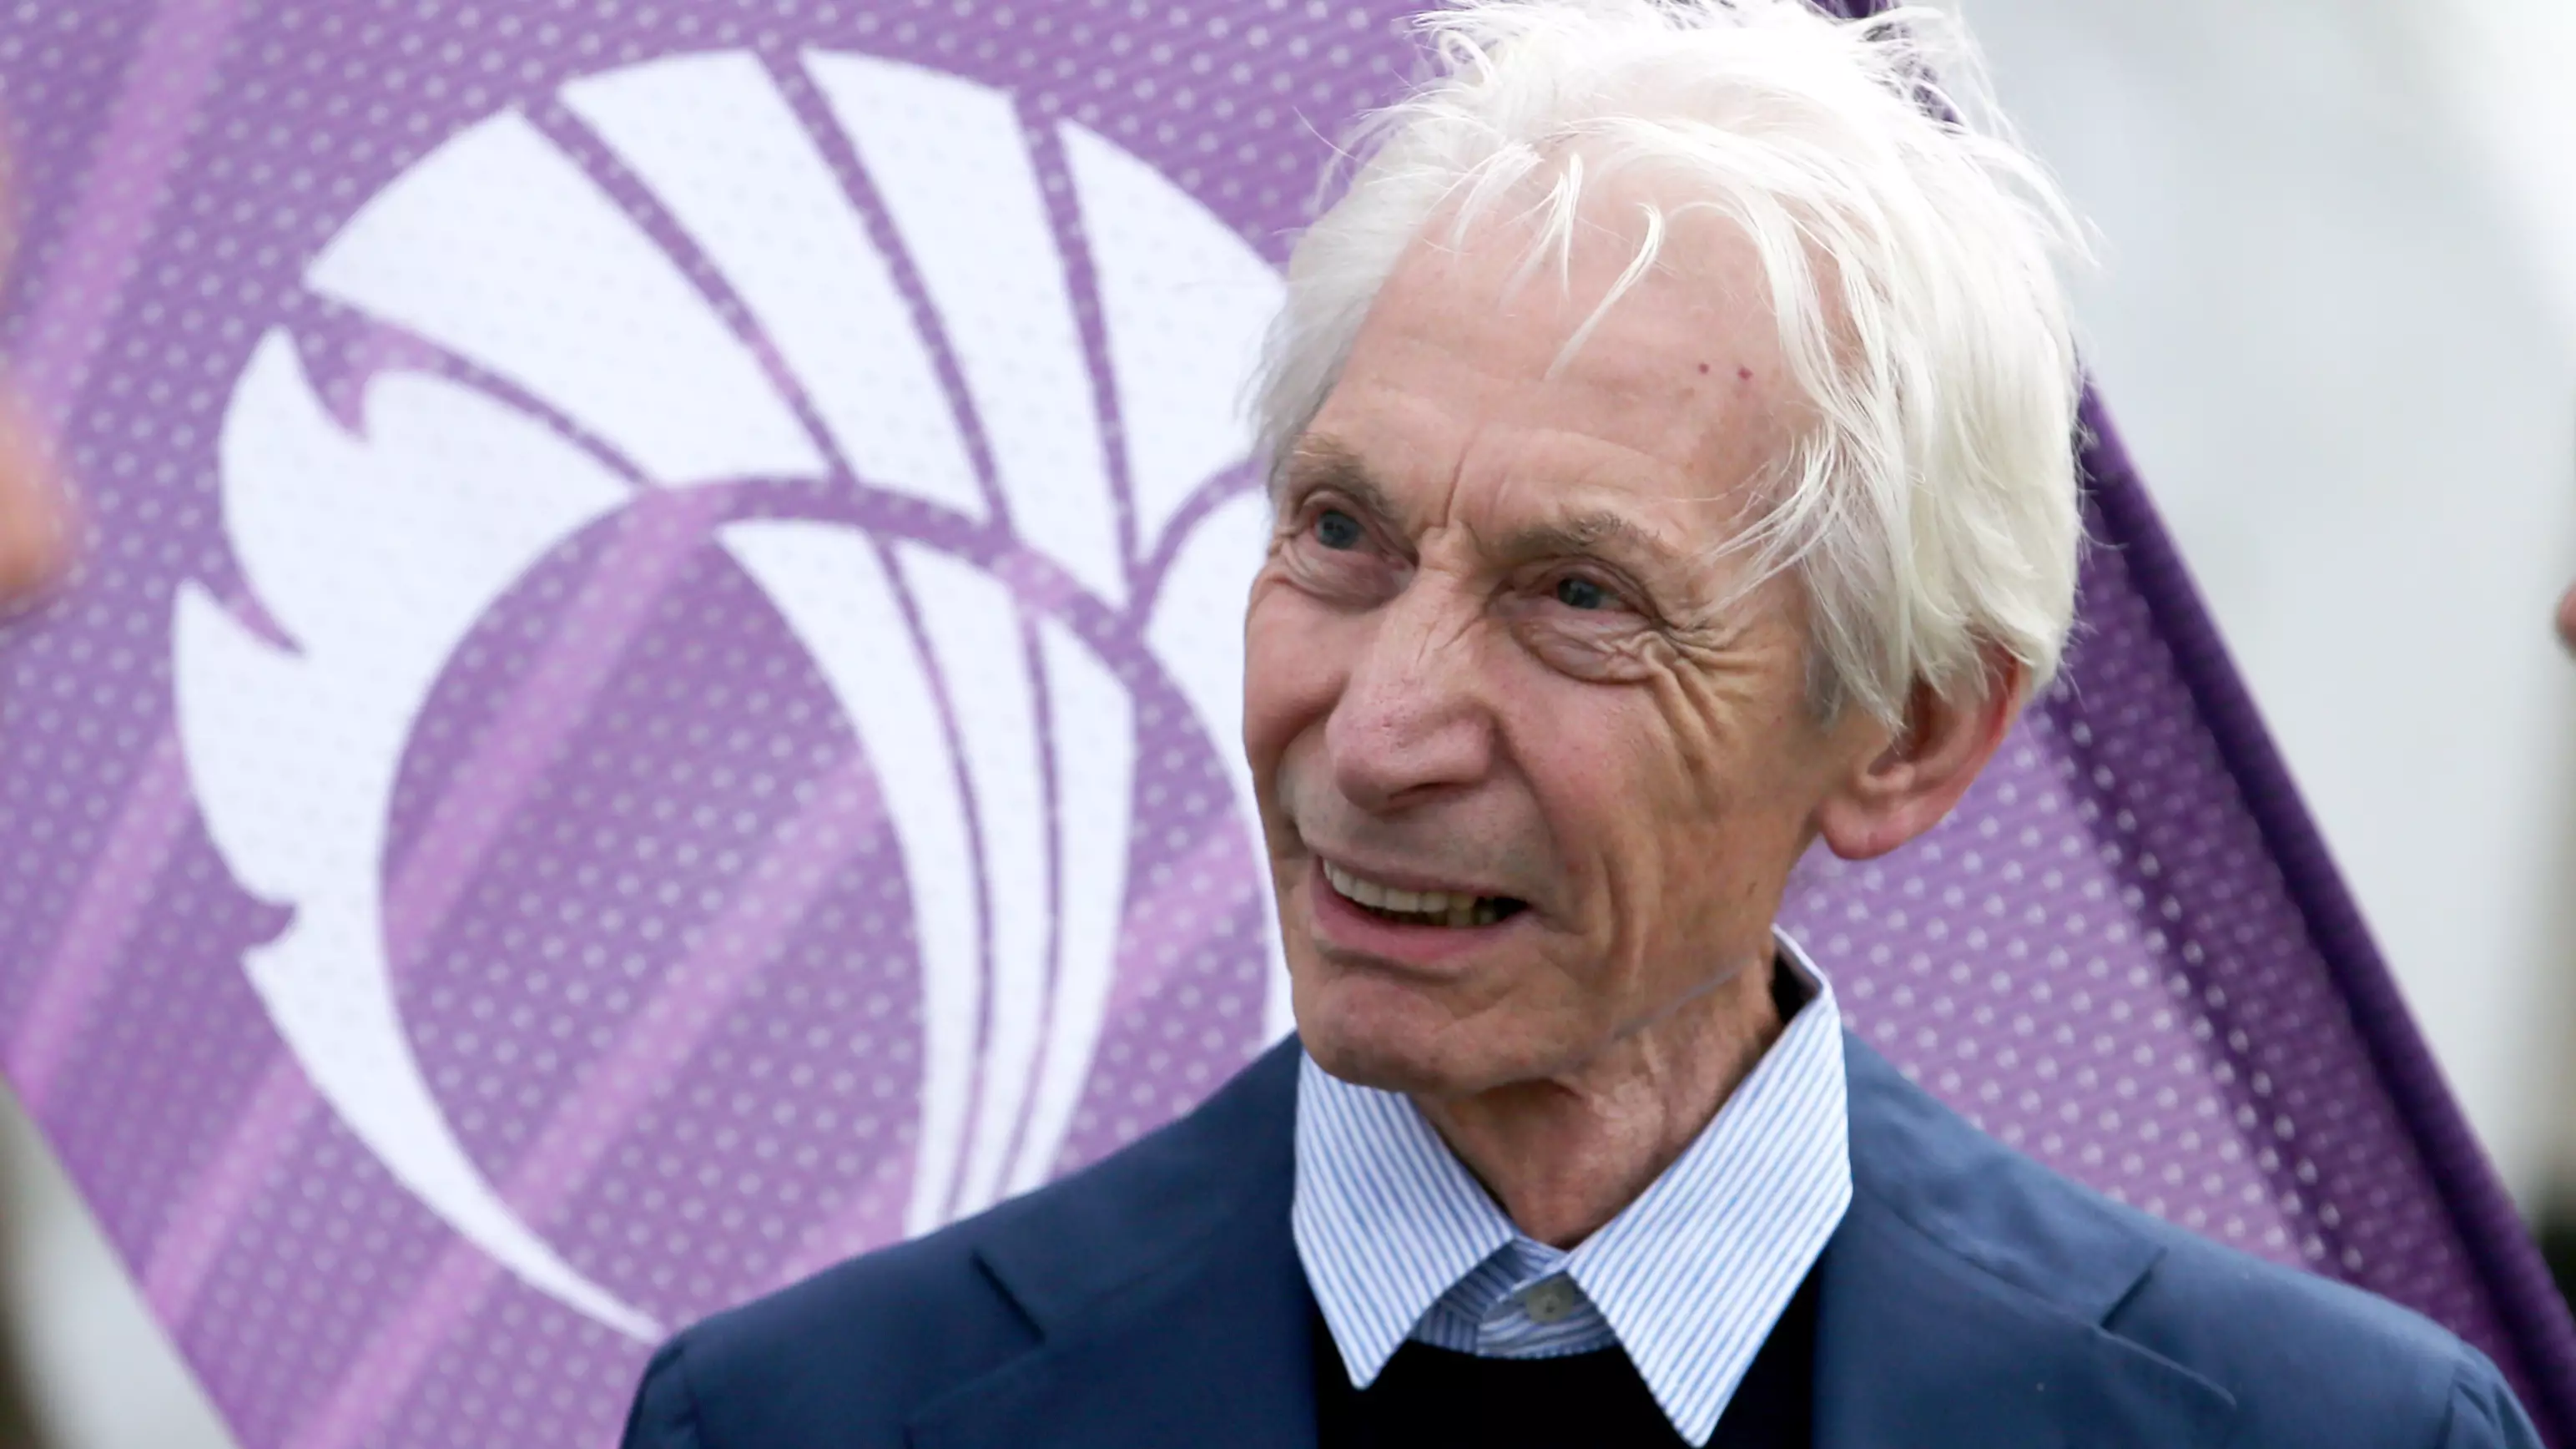 The Rolling Stones Drummer Charlie Watts Has Died